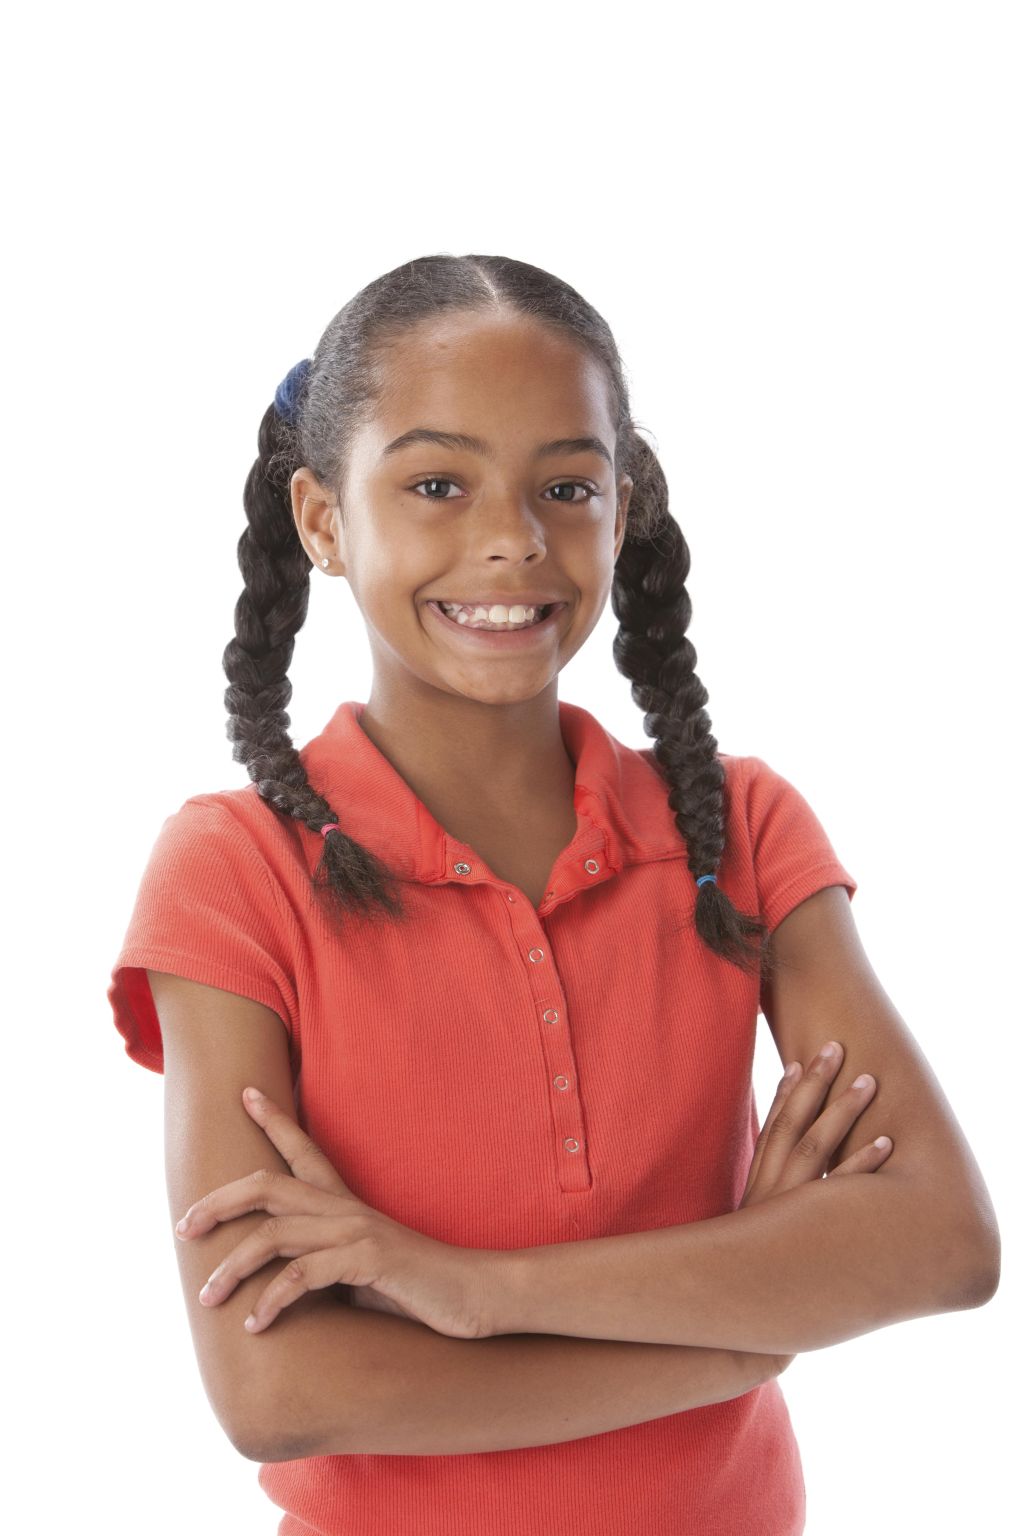 A head and shoulders image of a black little real girl with her arms crossed and a big smile on her face.